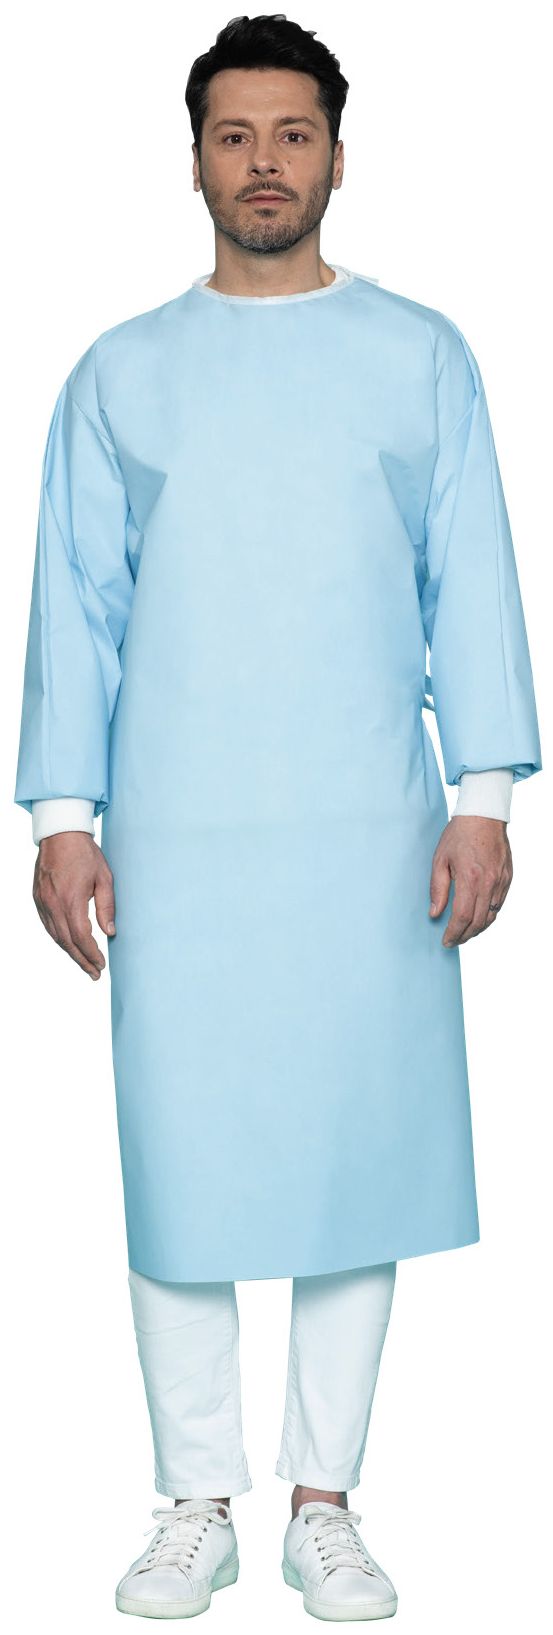 Level 4 Surgical Gown